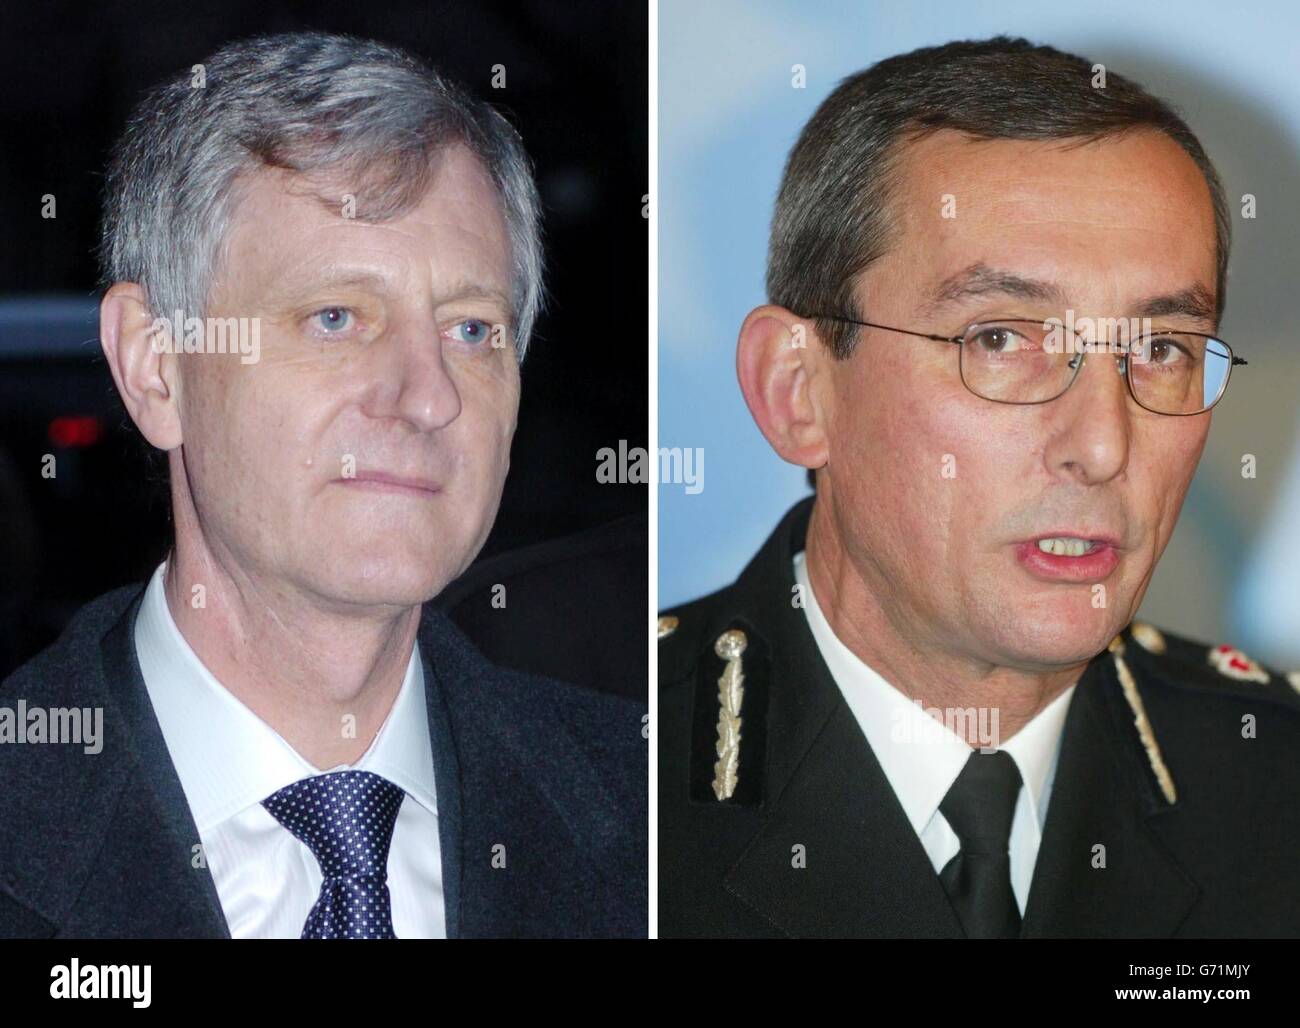 Composite image of Humberside Chief Constable David Westwood (left) and Cambridgeshire Chief Constable Tom Lloyd, who both faced mounting pressure, as their forces faced a scathing attack on how they let Soham killer Ian Huntley slip through the net. Sir Michael Bichard was expected to pull no punches and single out individuals for criticism when his report in to the flawed handling of Huntley was published today. Stock Photo